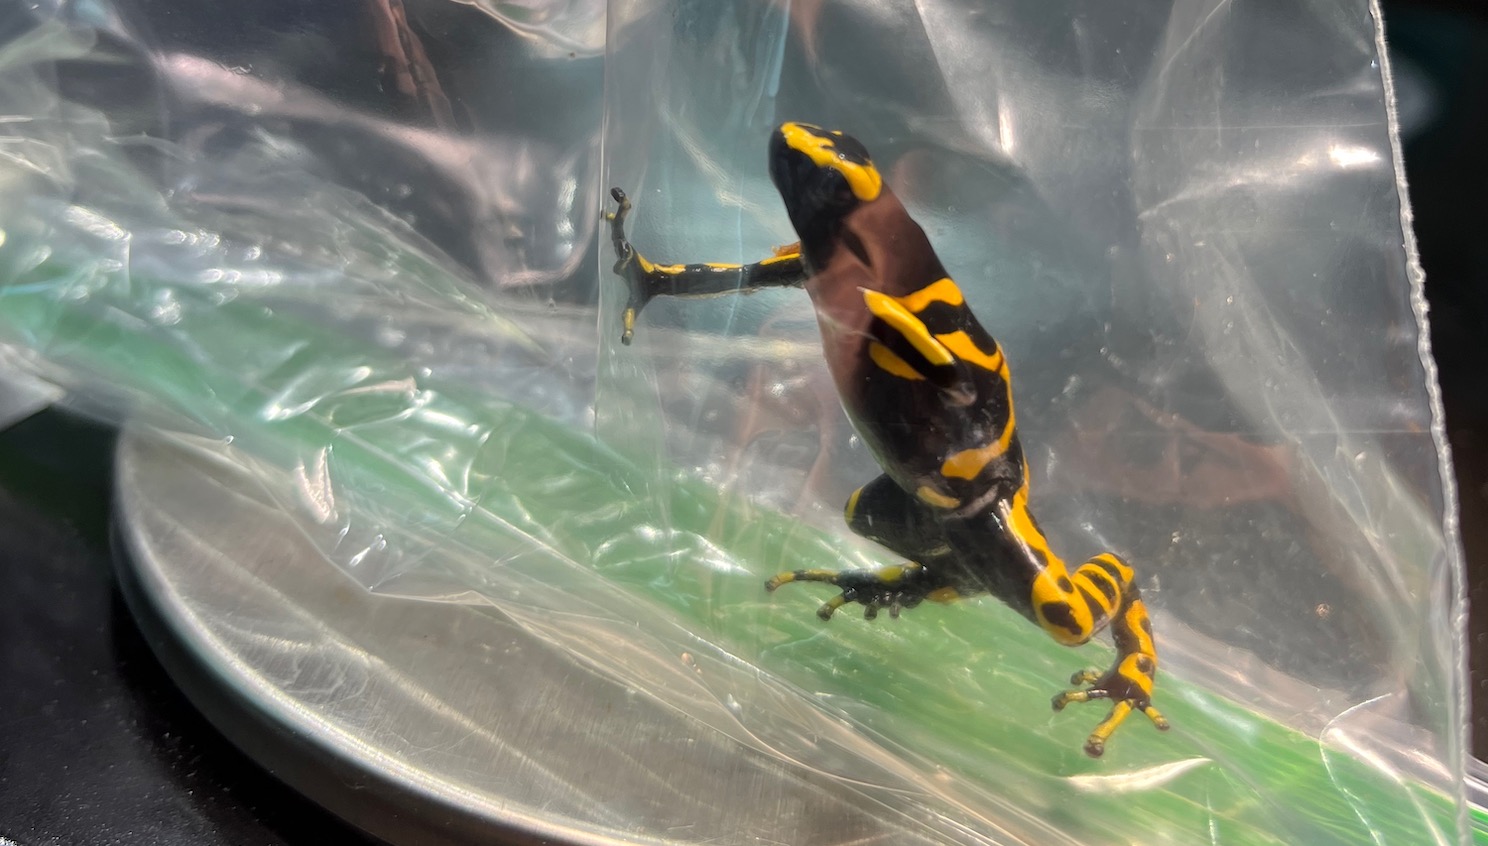 A yellow-banded poison dart frog (Dendrobates leucomelas) inside a plastic bag for handling. This allows us to contain the frog without physically restraining it, and helps protects the animal from temperature increases and skin irritation.